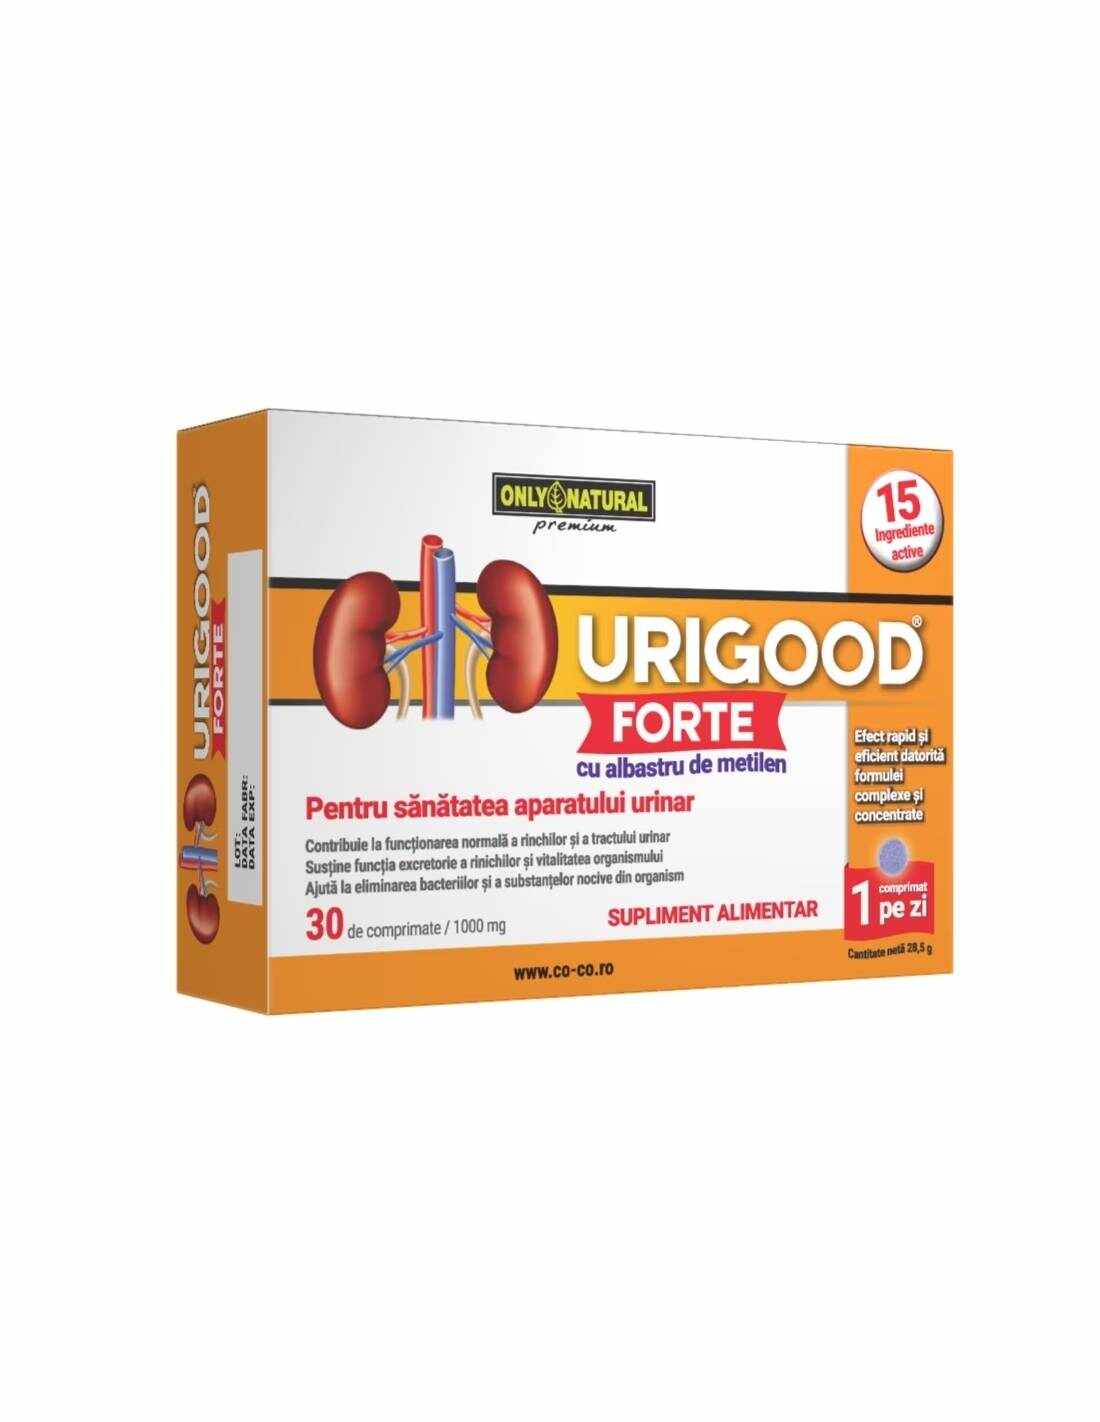 Urigood forte 1000 mg, 30 comprimate, Only Natural